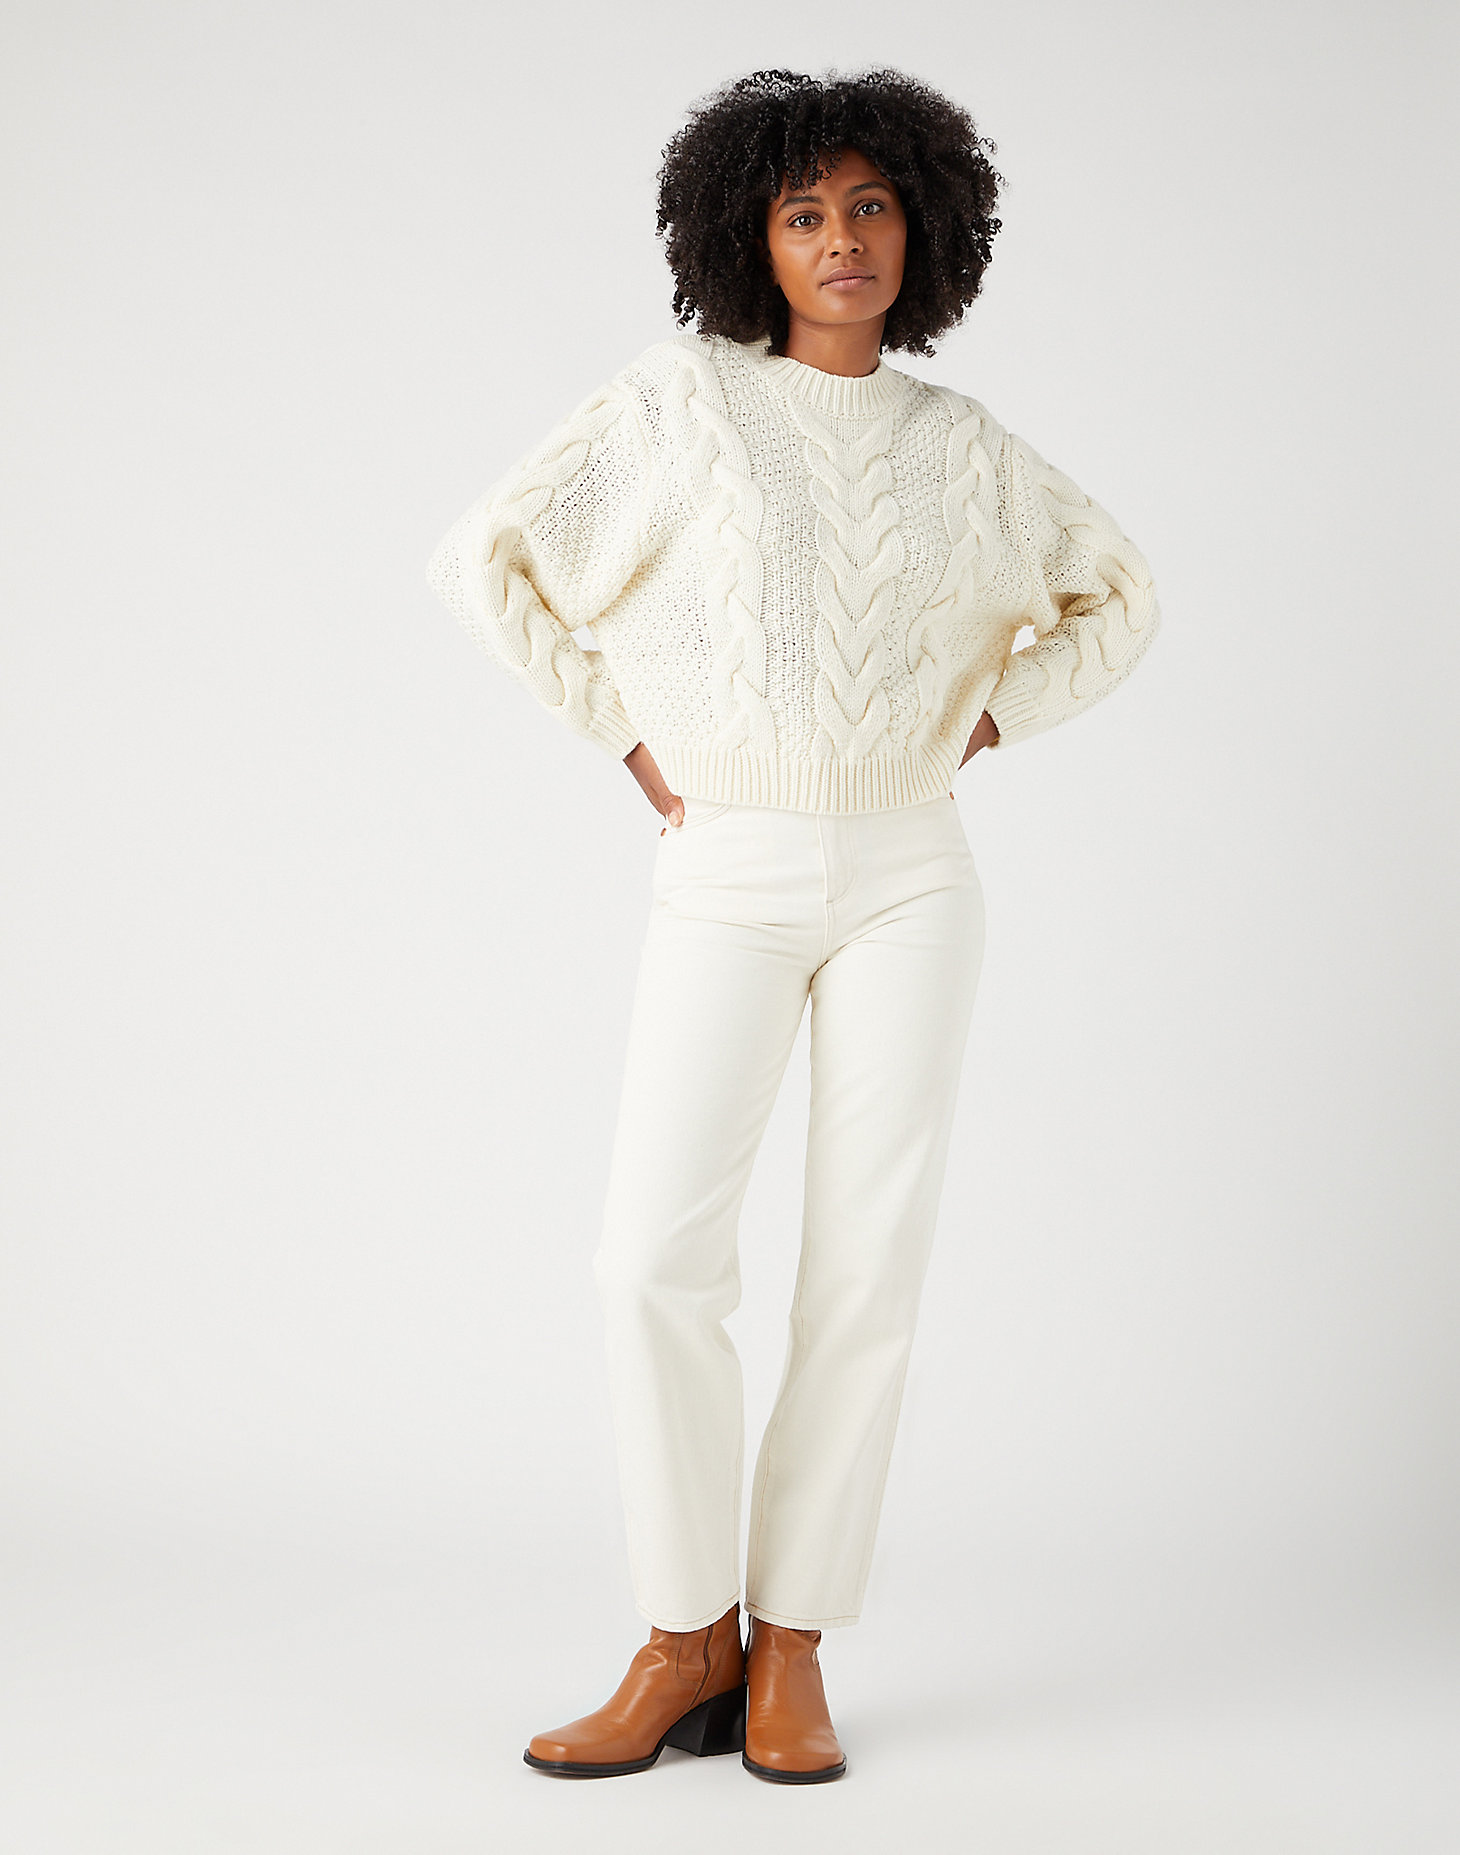 Crew Neck Cable Knit in Worn White alternative view 3